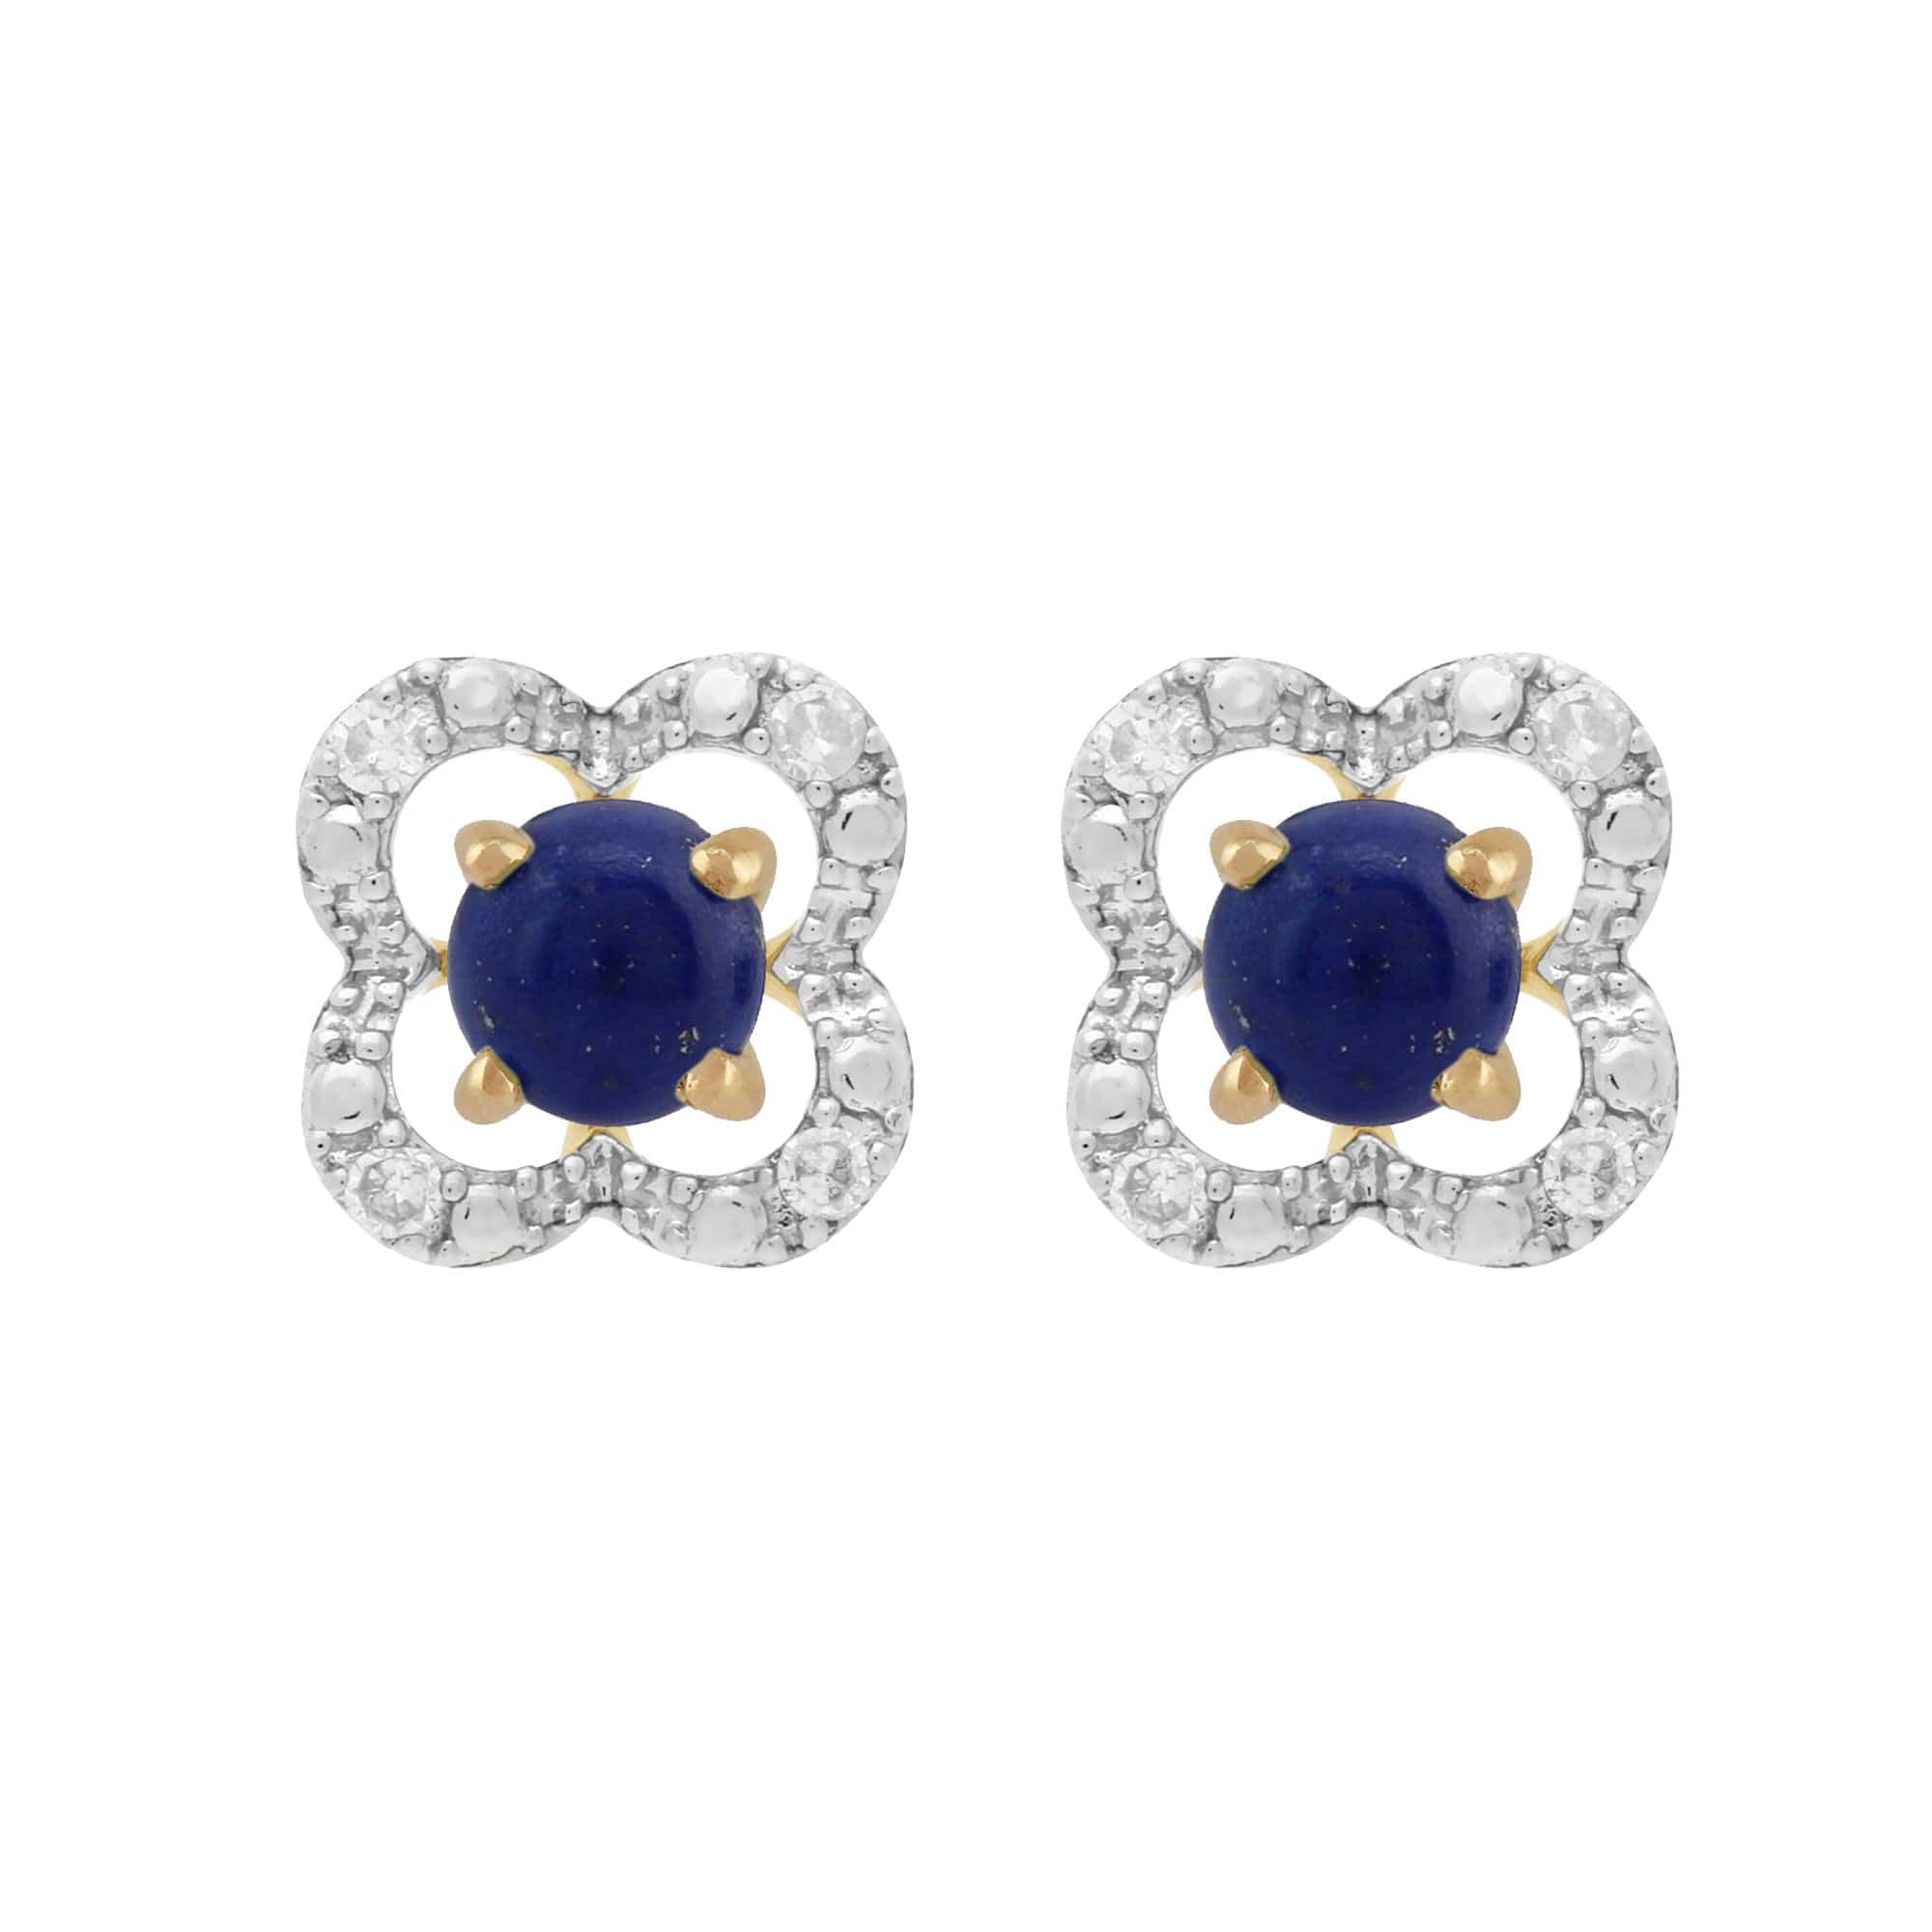 183E0083419-191E0375019 Classic Round Lapis Lazuli Studs with Detachable Diamond Floral Ear Jacket in 9ct Yellow Gold 1